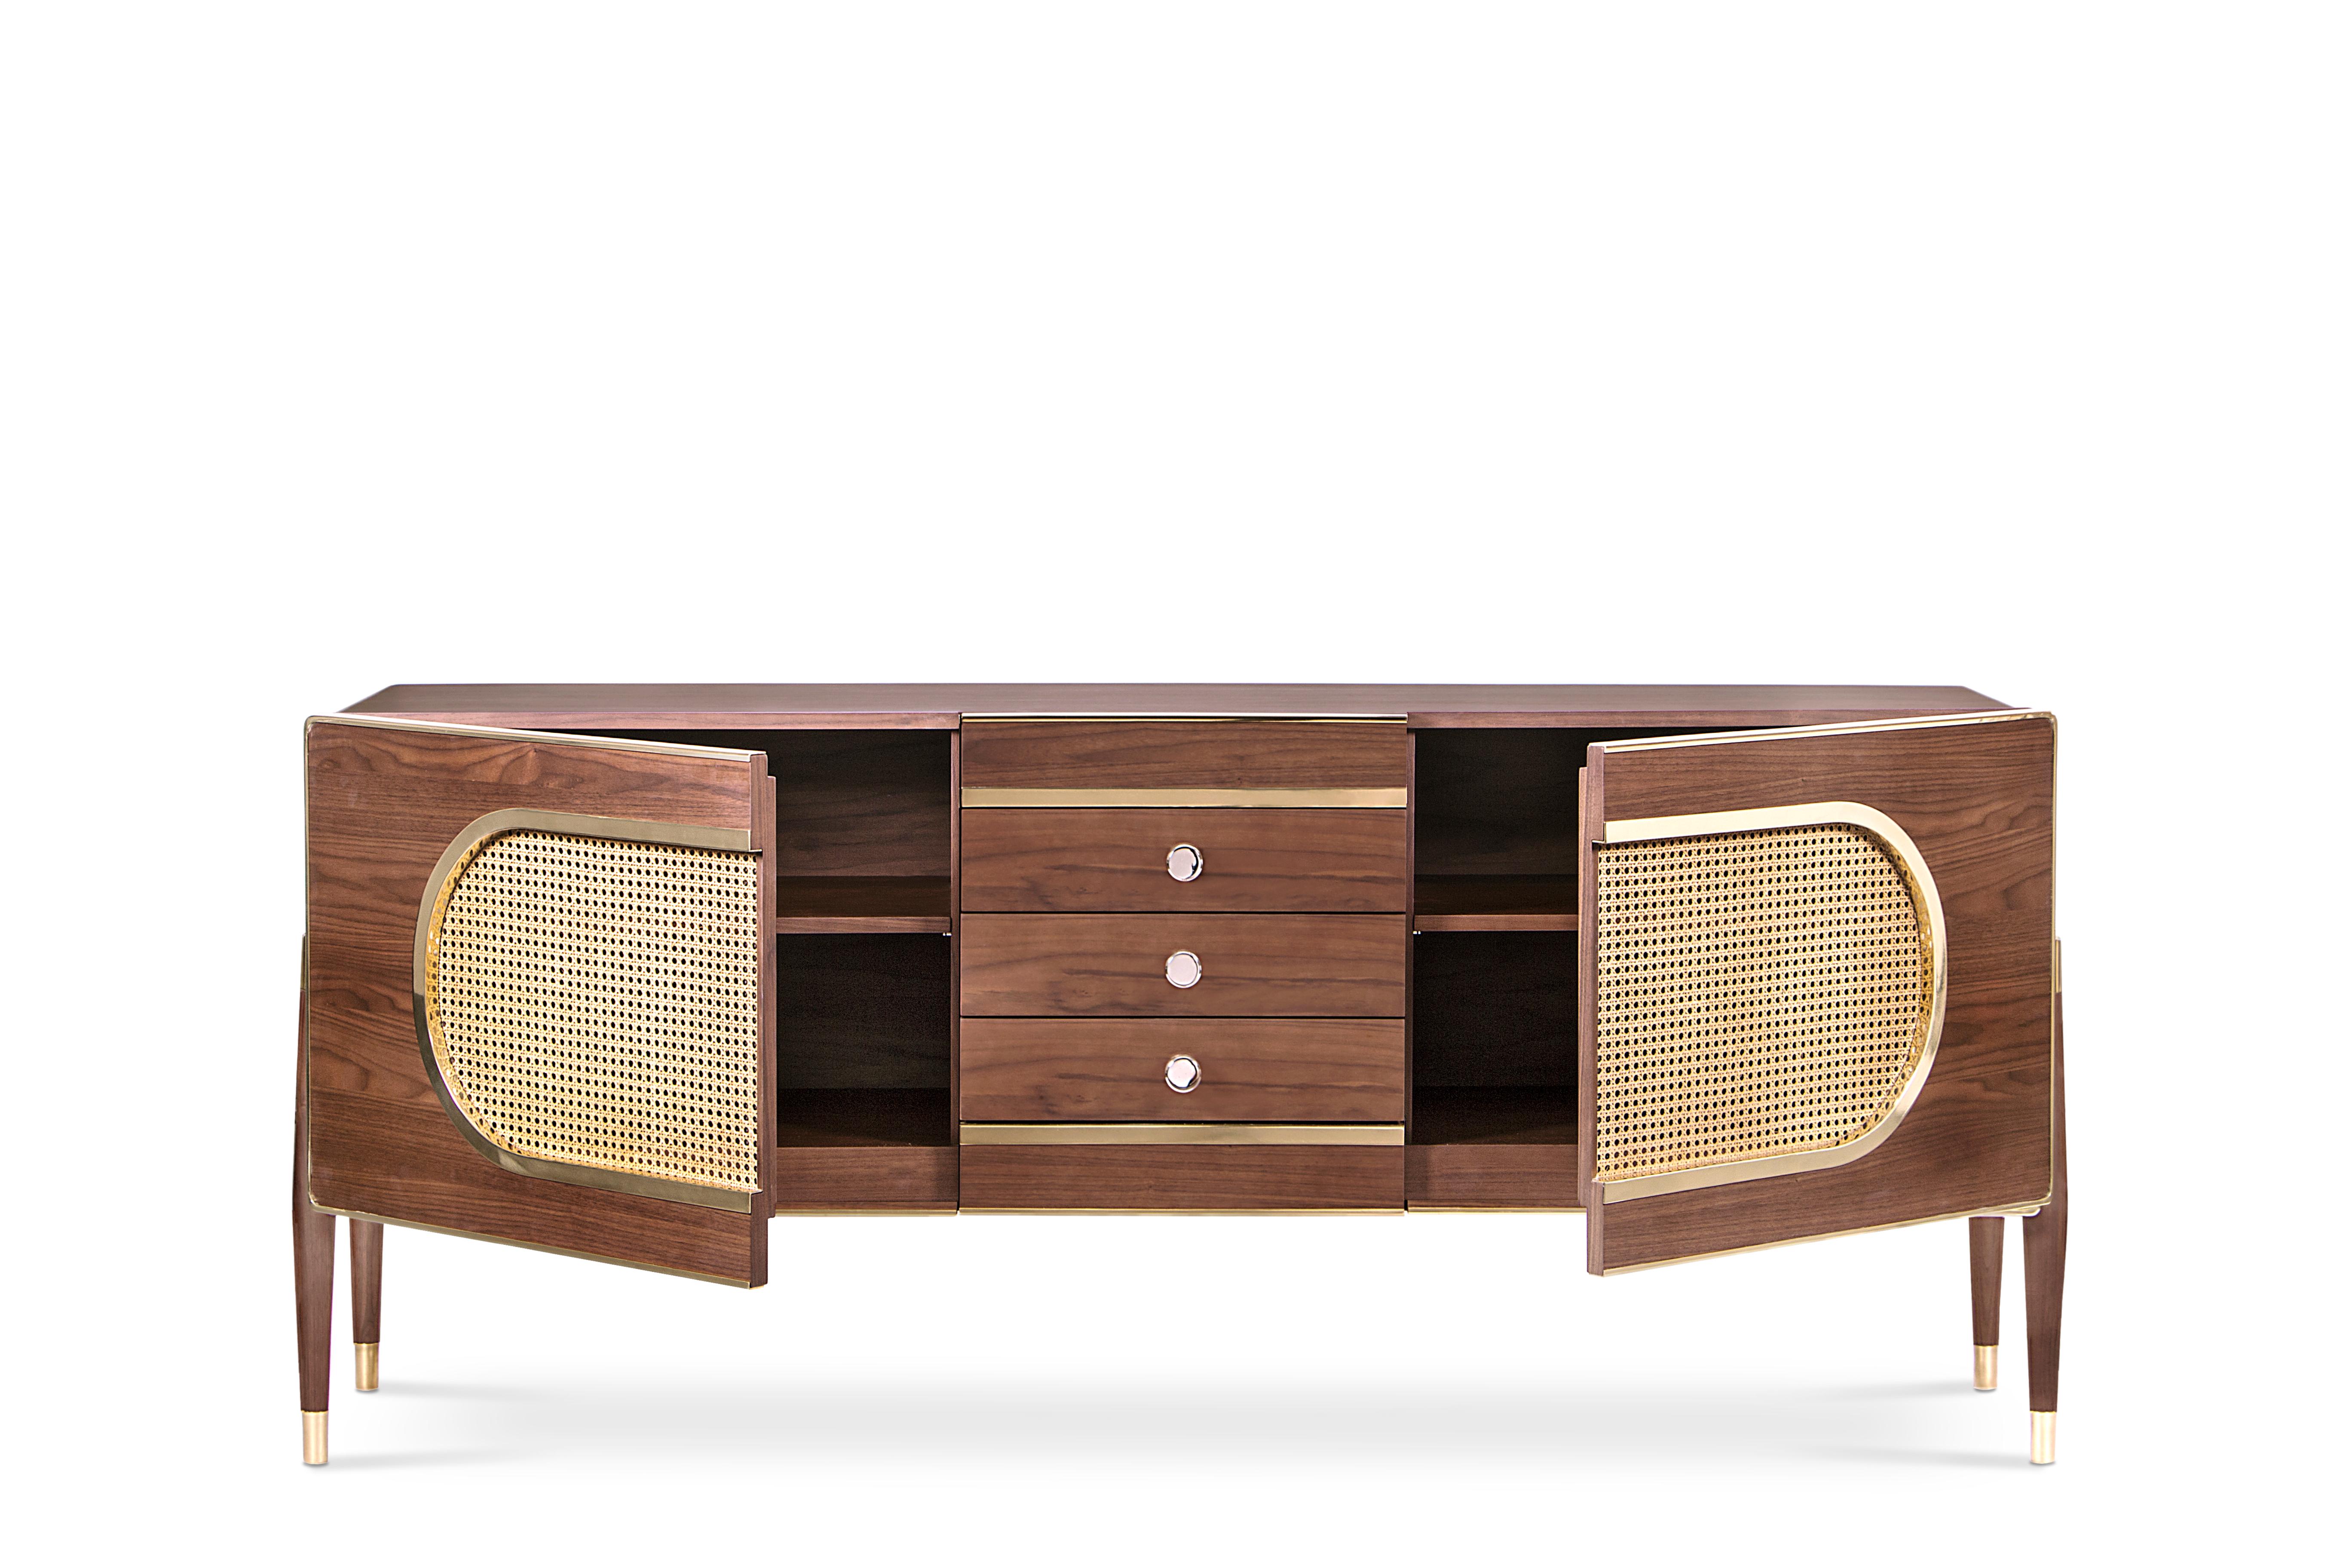 Like vintage radios, this console will make you look twice. No, it’s not a giant radio but a rare wood & gold sideboard. The sleek outline of this unique midcentury modern piece makes you surrender to the Scandinavian design every time you look at